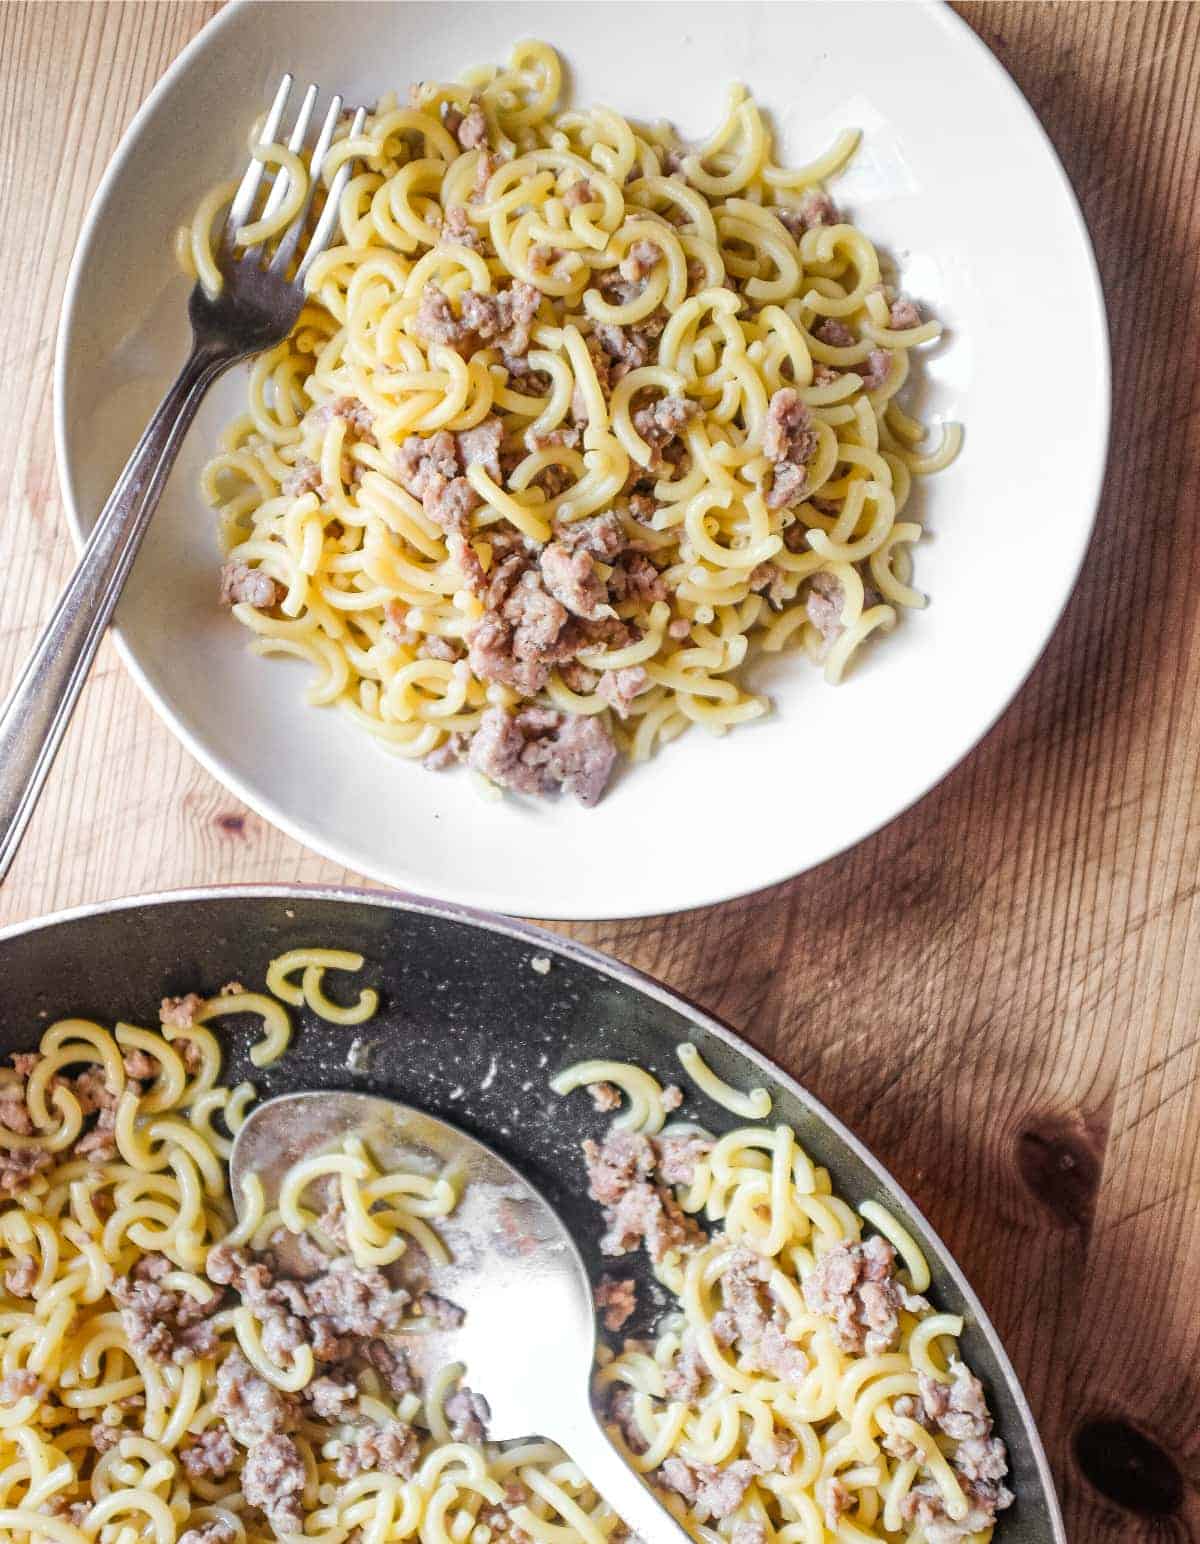 A bowl of Gramigna pasta with sausage sits next to a pan full of the pasta